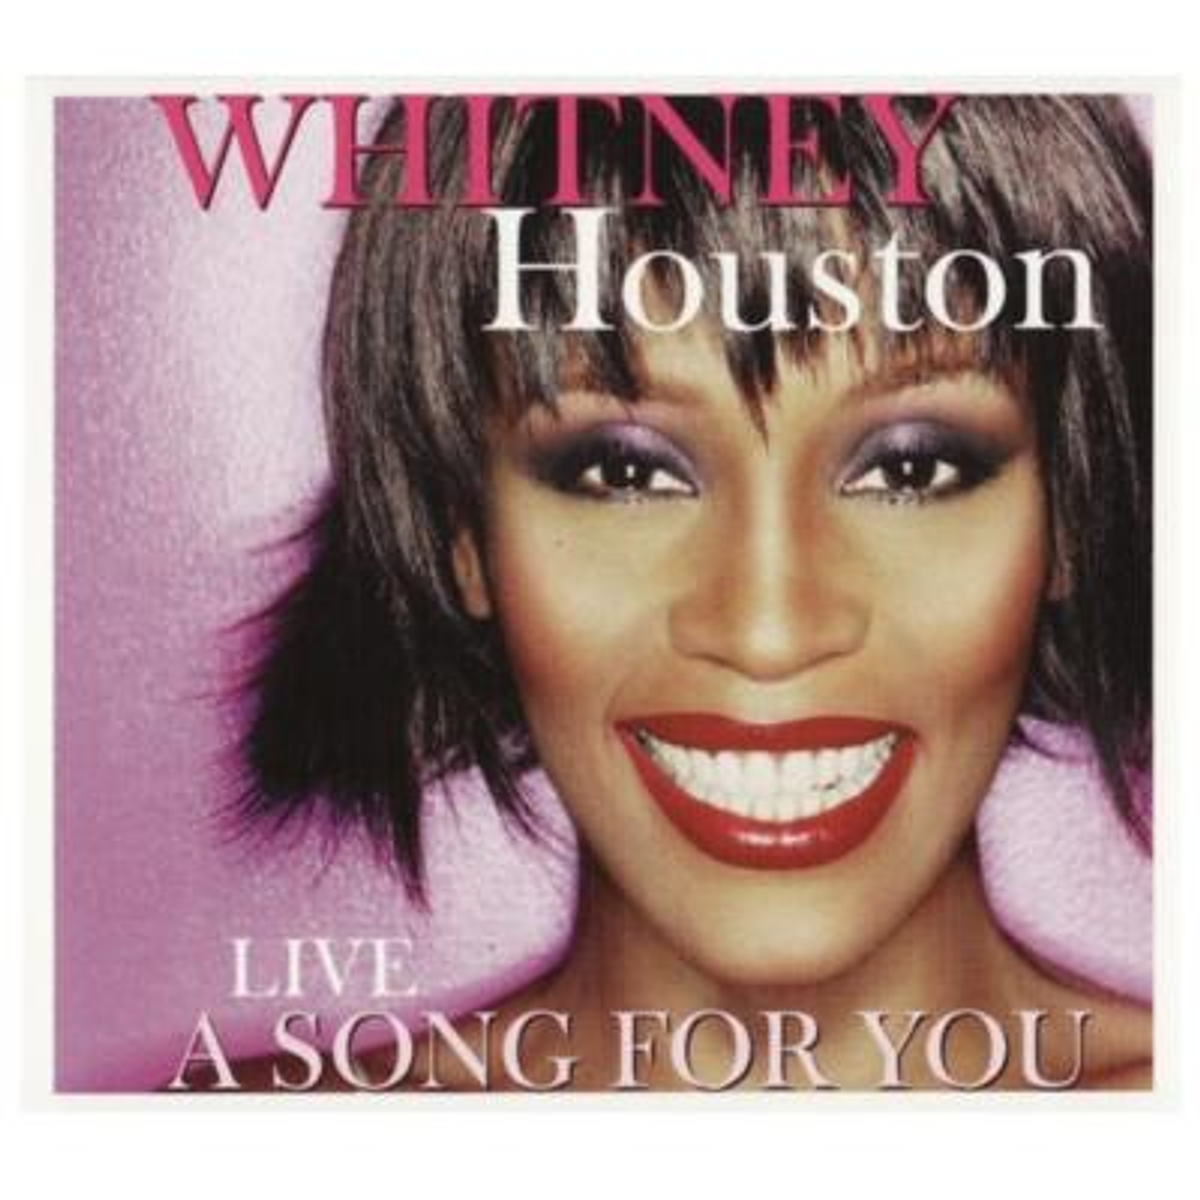 WHITNEY HOUSTON - A SONG FOR YOU LIVE CD